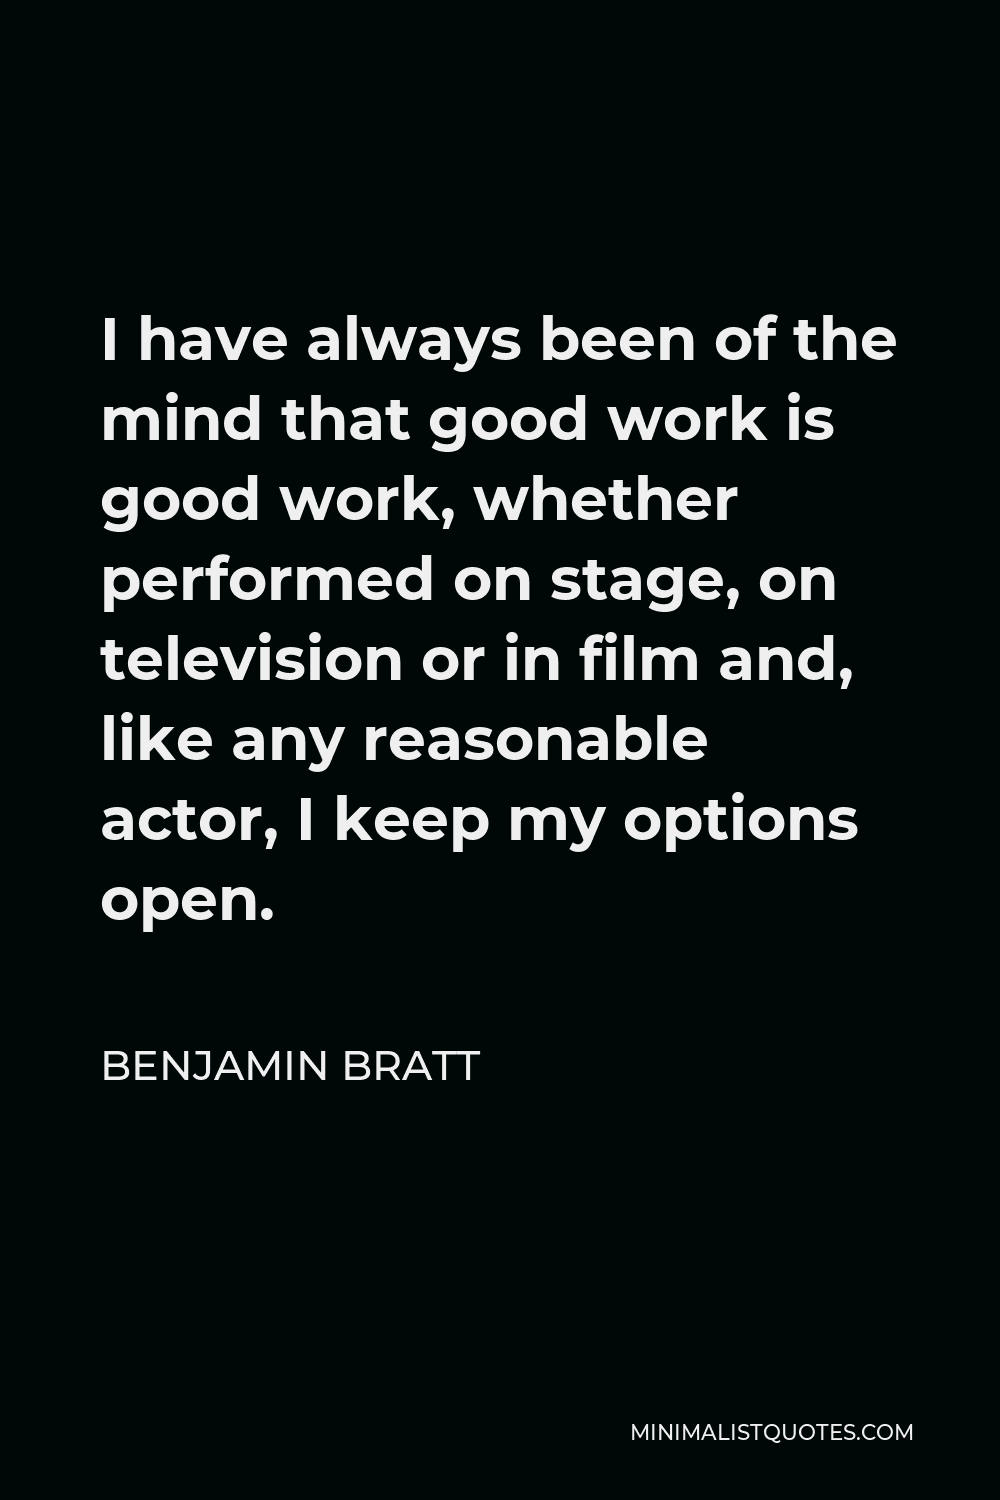 Benjamin Bratt Quote - I have always been of the mind that good work is good work, whether performed on stage, on television or in film and, like any reasonable actor, I keep my options open.